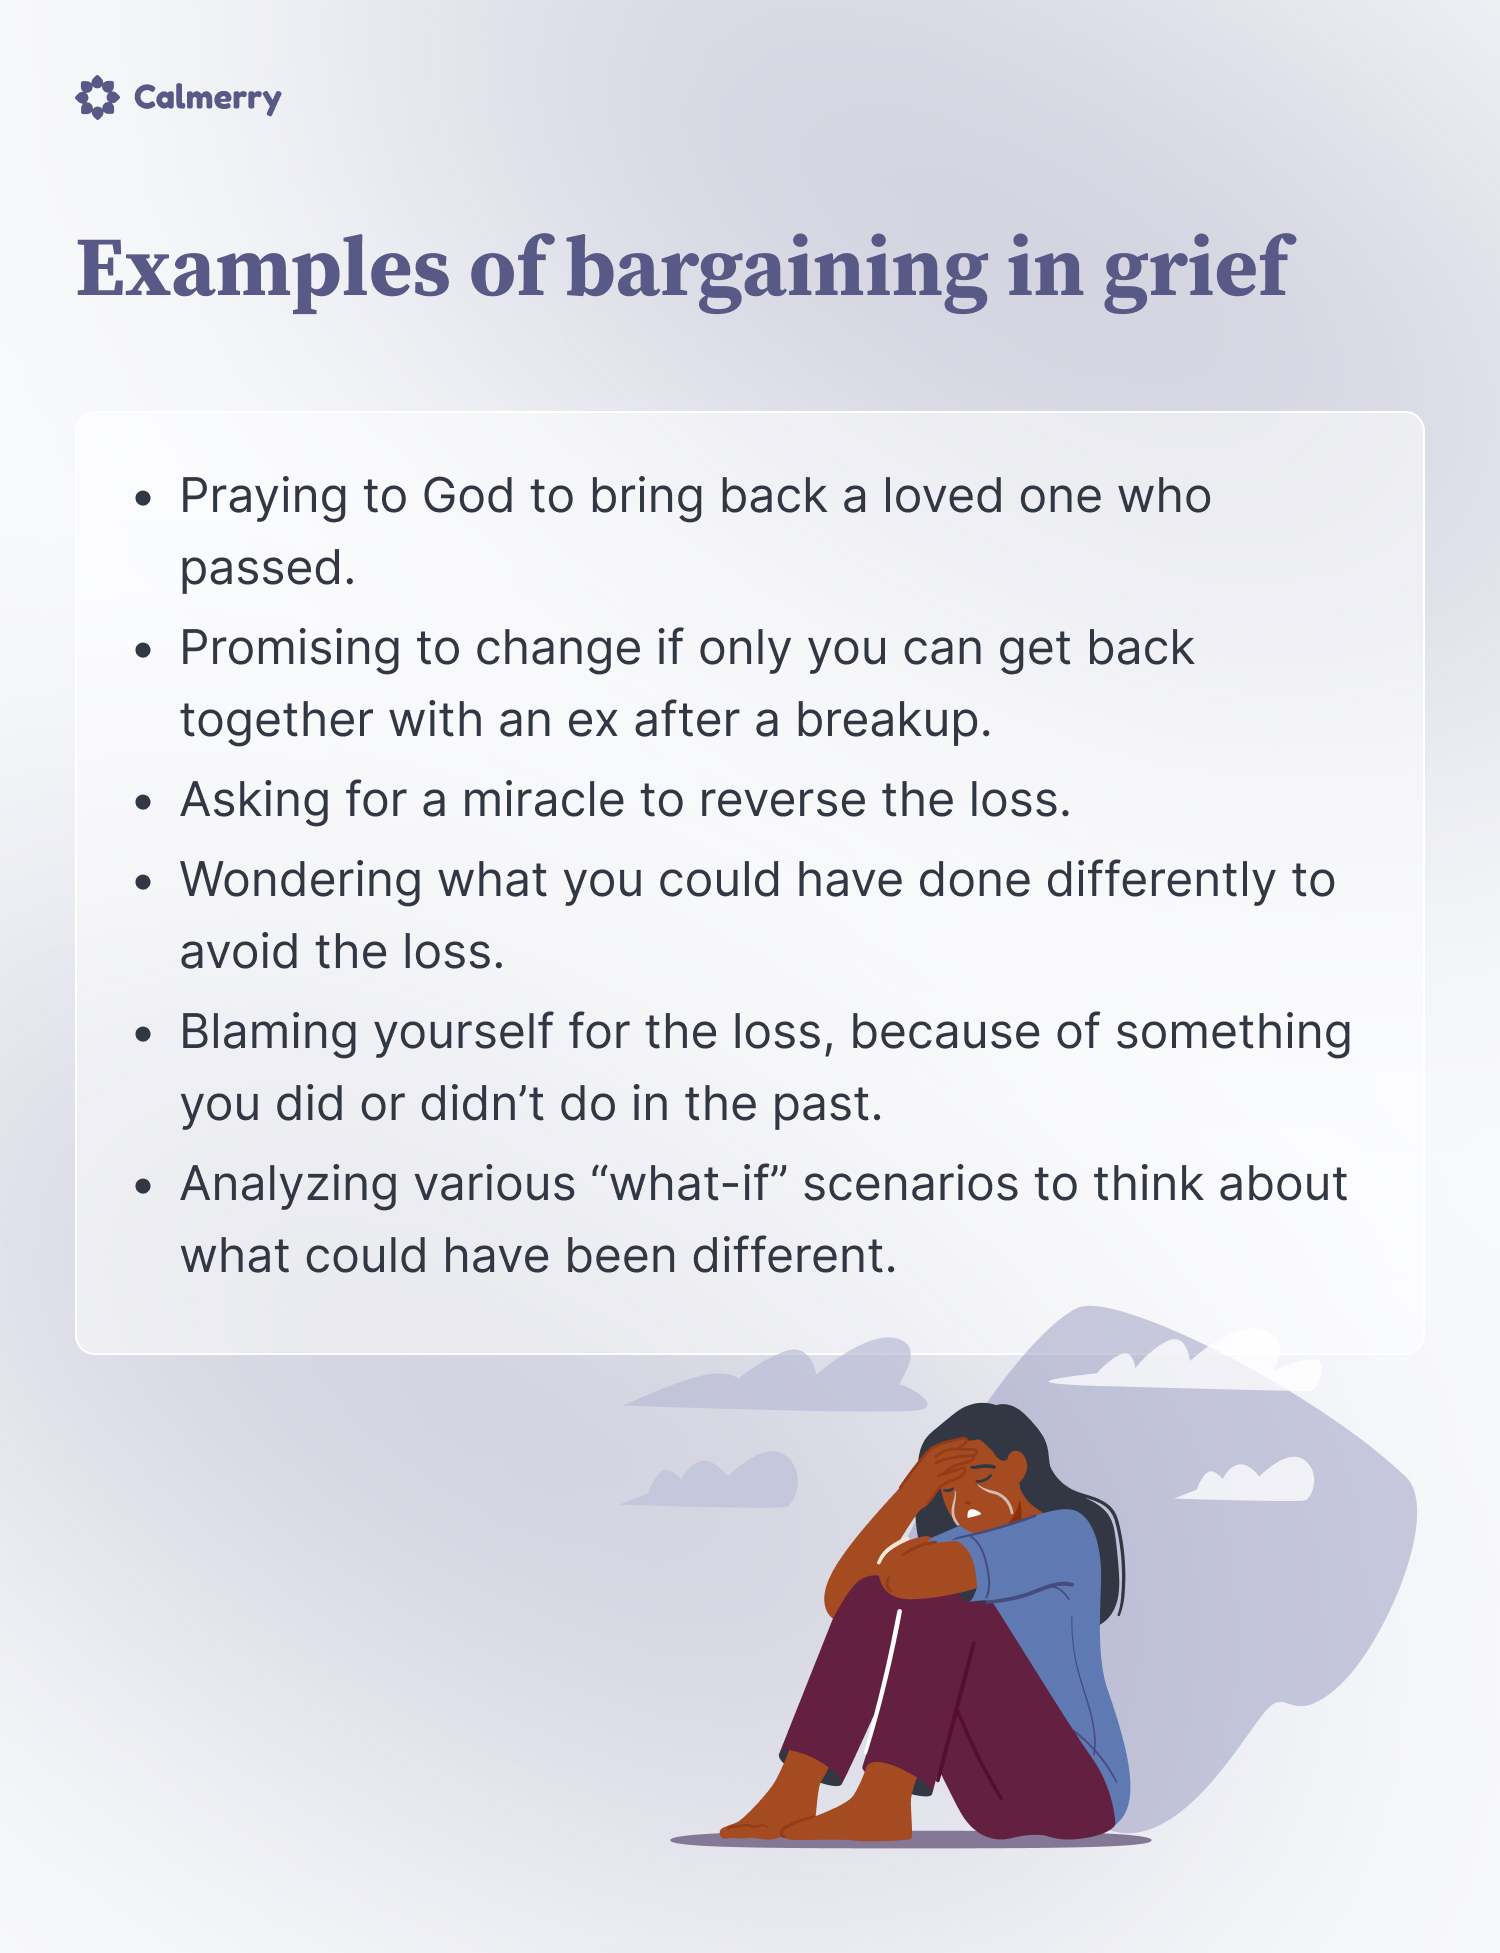 Examples of bargaining in grief

Praying to God to bring back a loved one who passed.
Promising to change if only you can get back together with an ex after a breakup.
Asking for a miracle to reverse the loss.
Wondering what you could have done differently to avoid the loss.
Blaming yourself for the loss, because of something you did or didn’t do in the past. 
Analyzing various “what-if” scenarios to think about what could have been different. 
